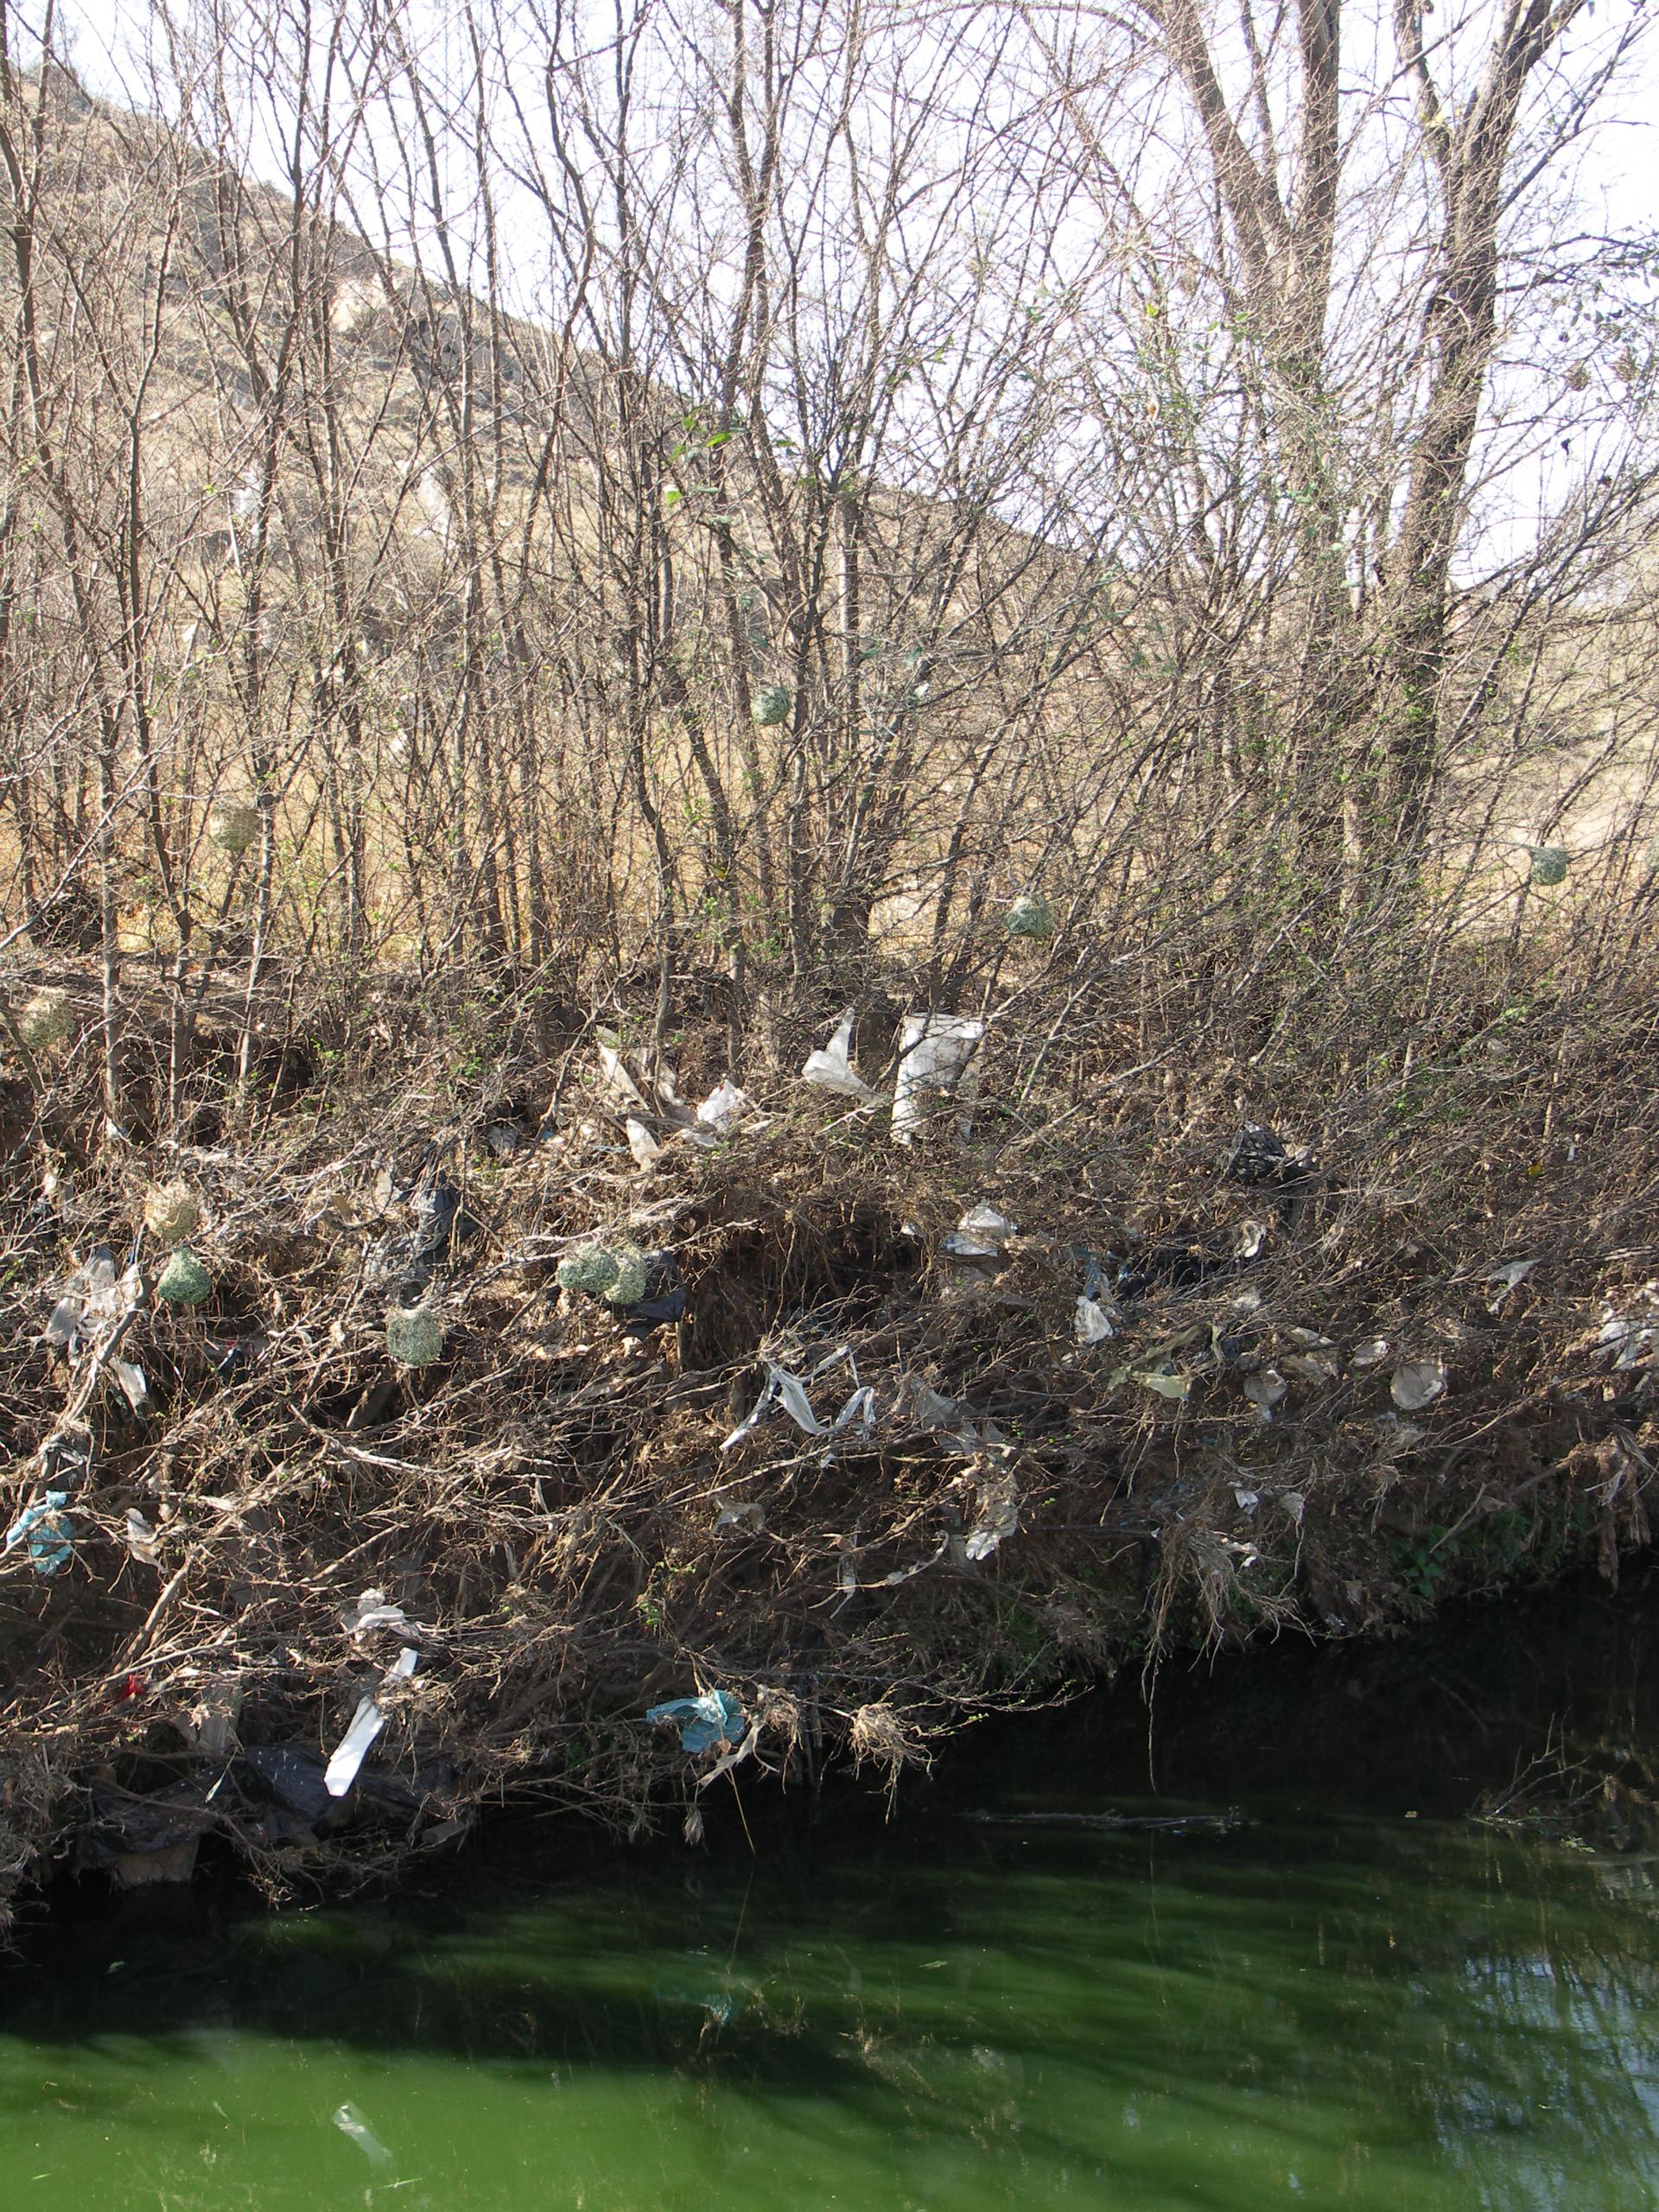 A riverbank filled with plastic bags